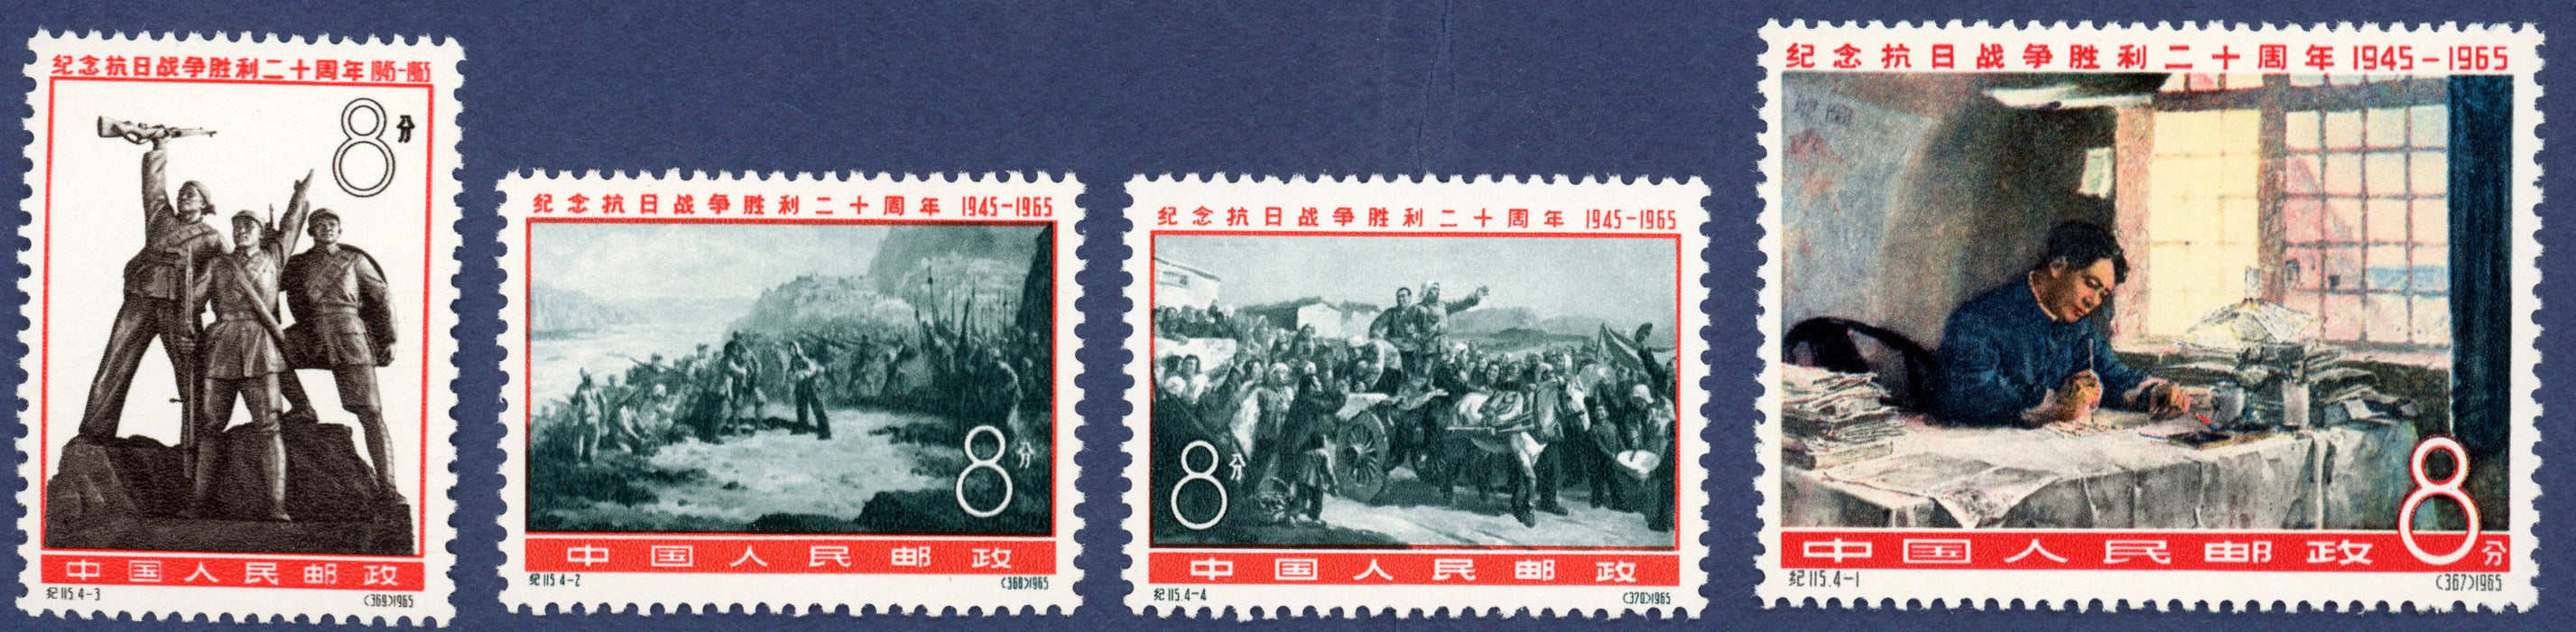 China 1965 PRC General Issues 20th Anniversary of Victory over Japanese, SG2276/79